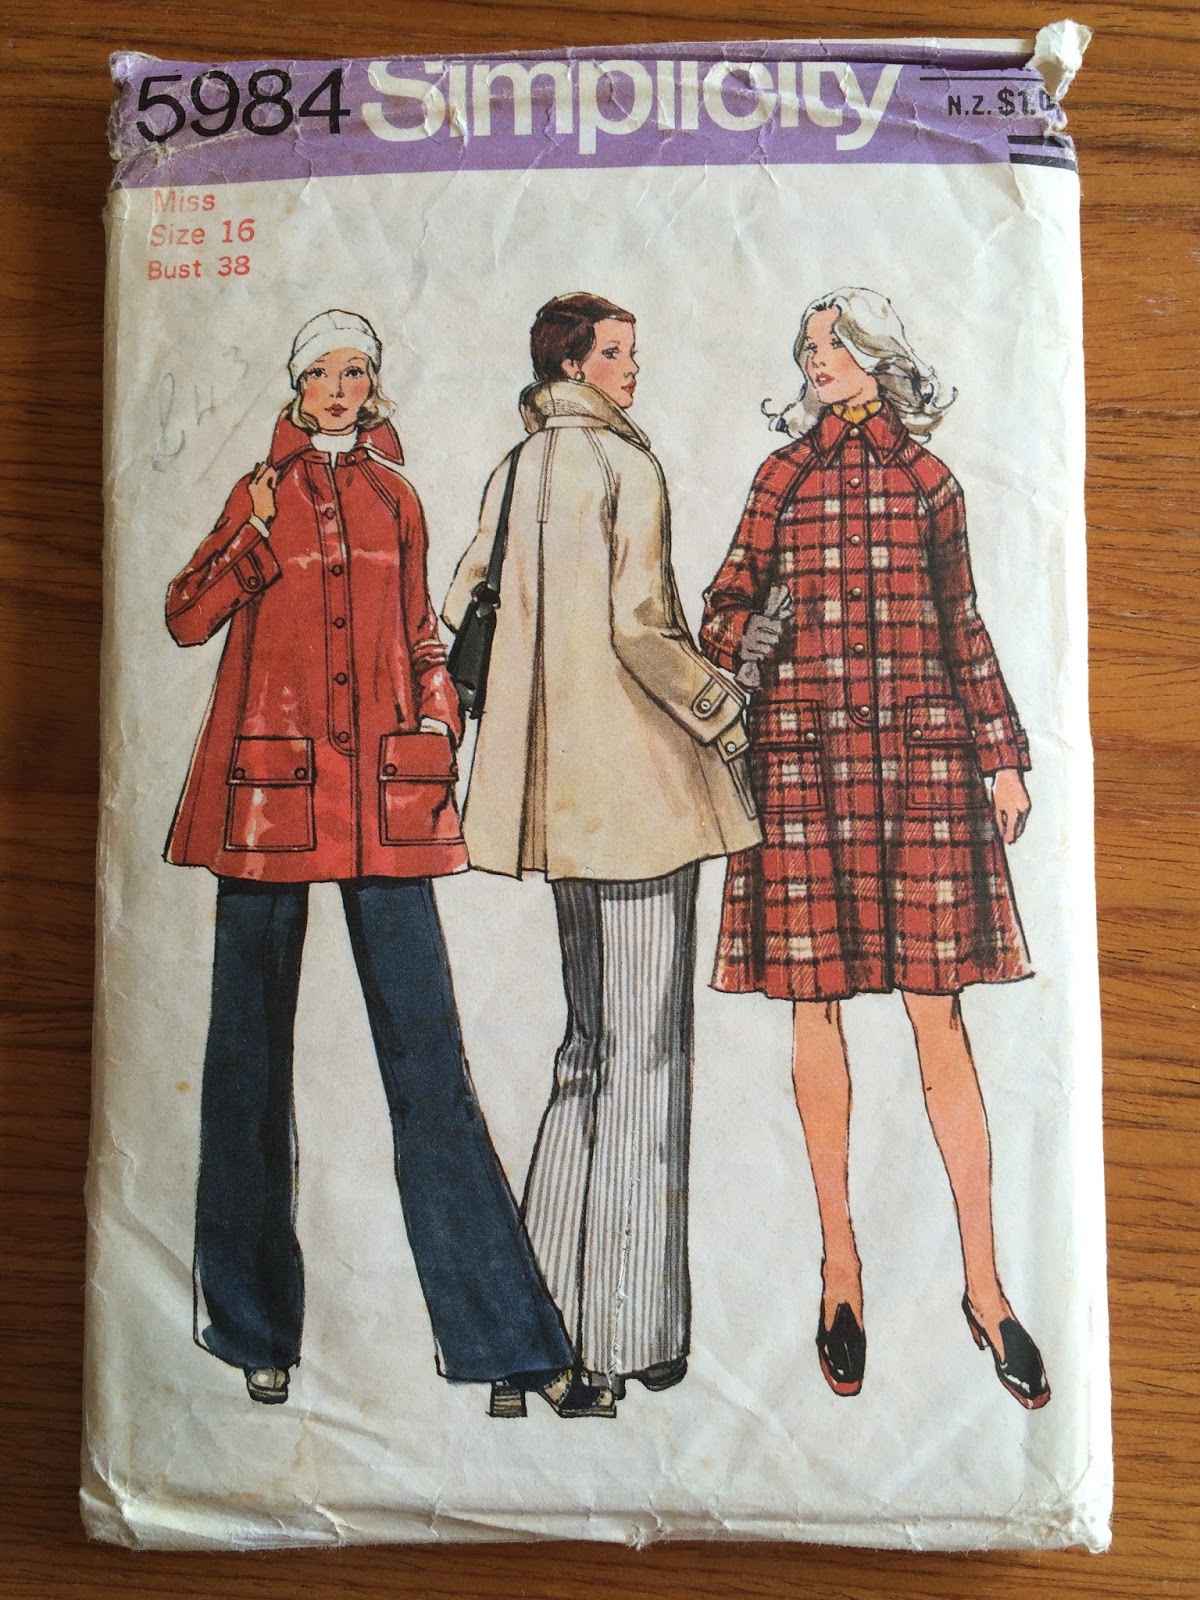 Sewing the 60s: My Patterns